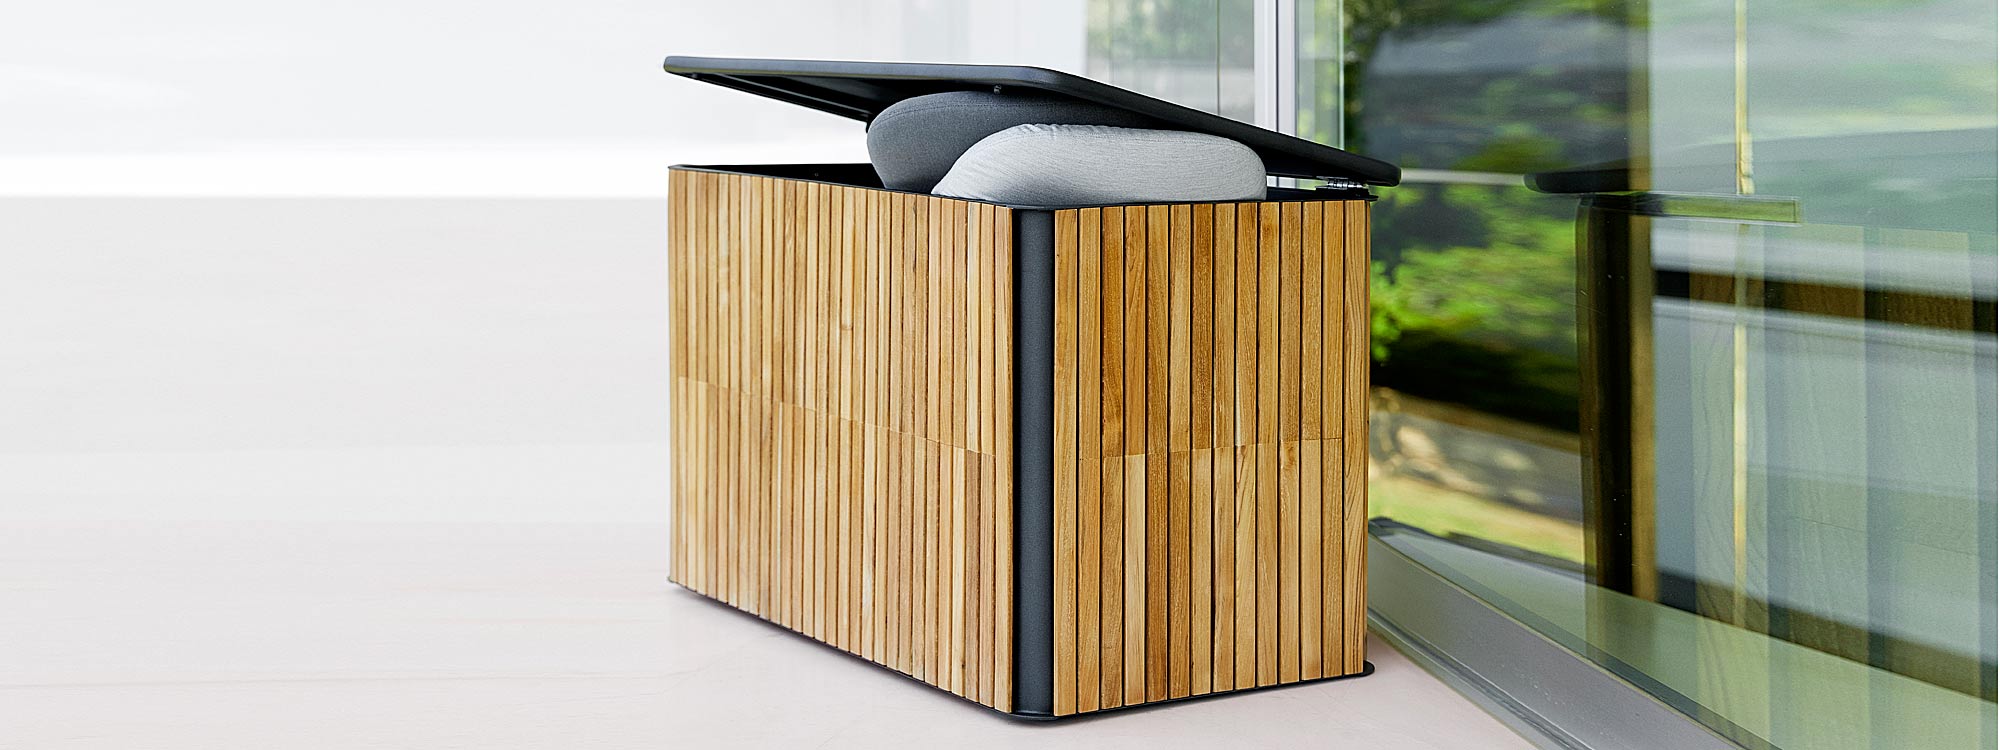 Image of Cane-line cushion box in Lava-grey aluminum with teak slats, shown with lid ajar and cushions poking out